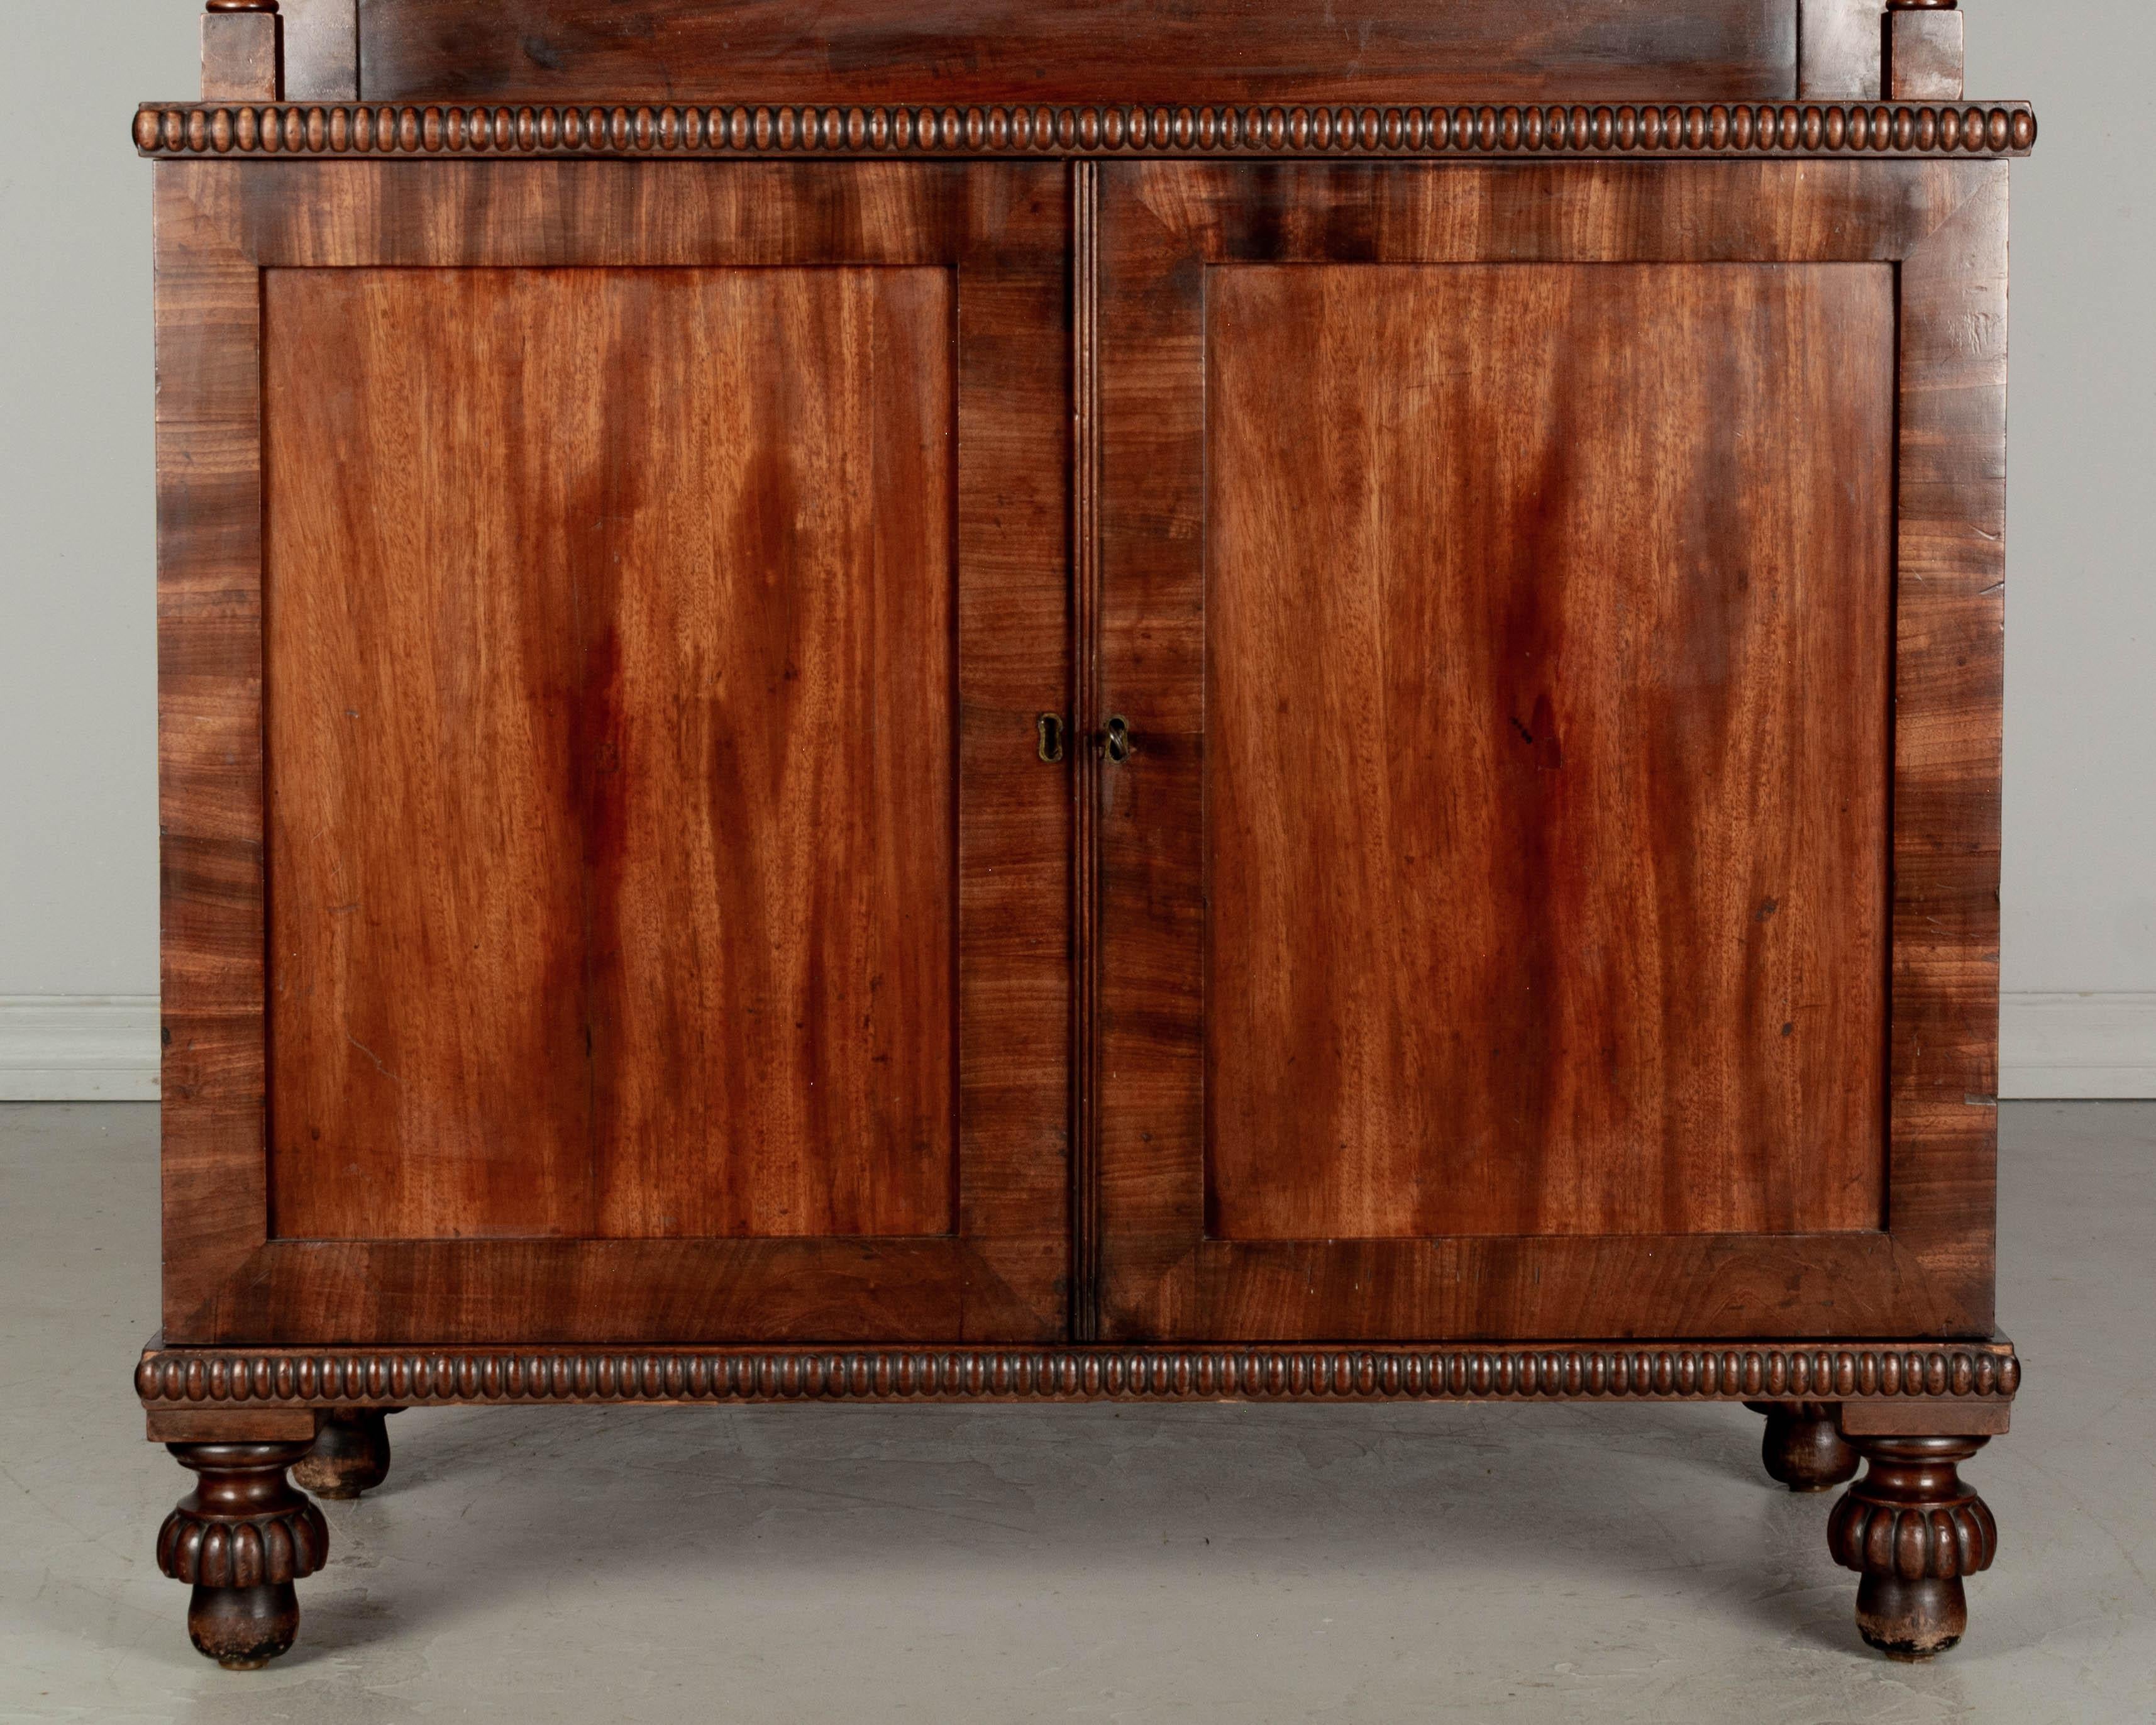 Hand-Crafted 19th Century English Mahogany Sideboard with Shelves For Sale